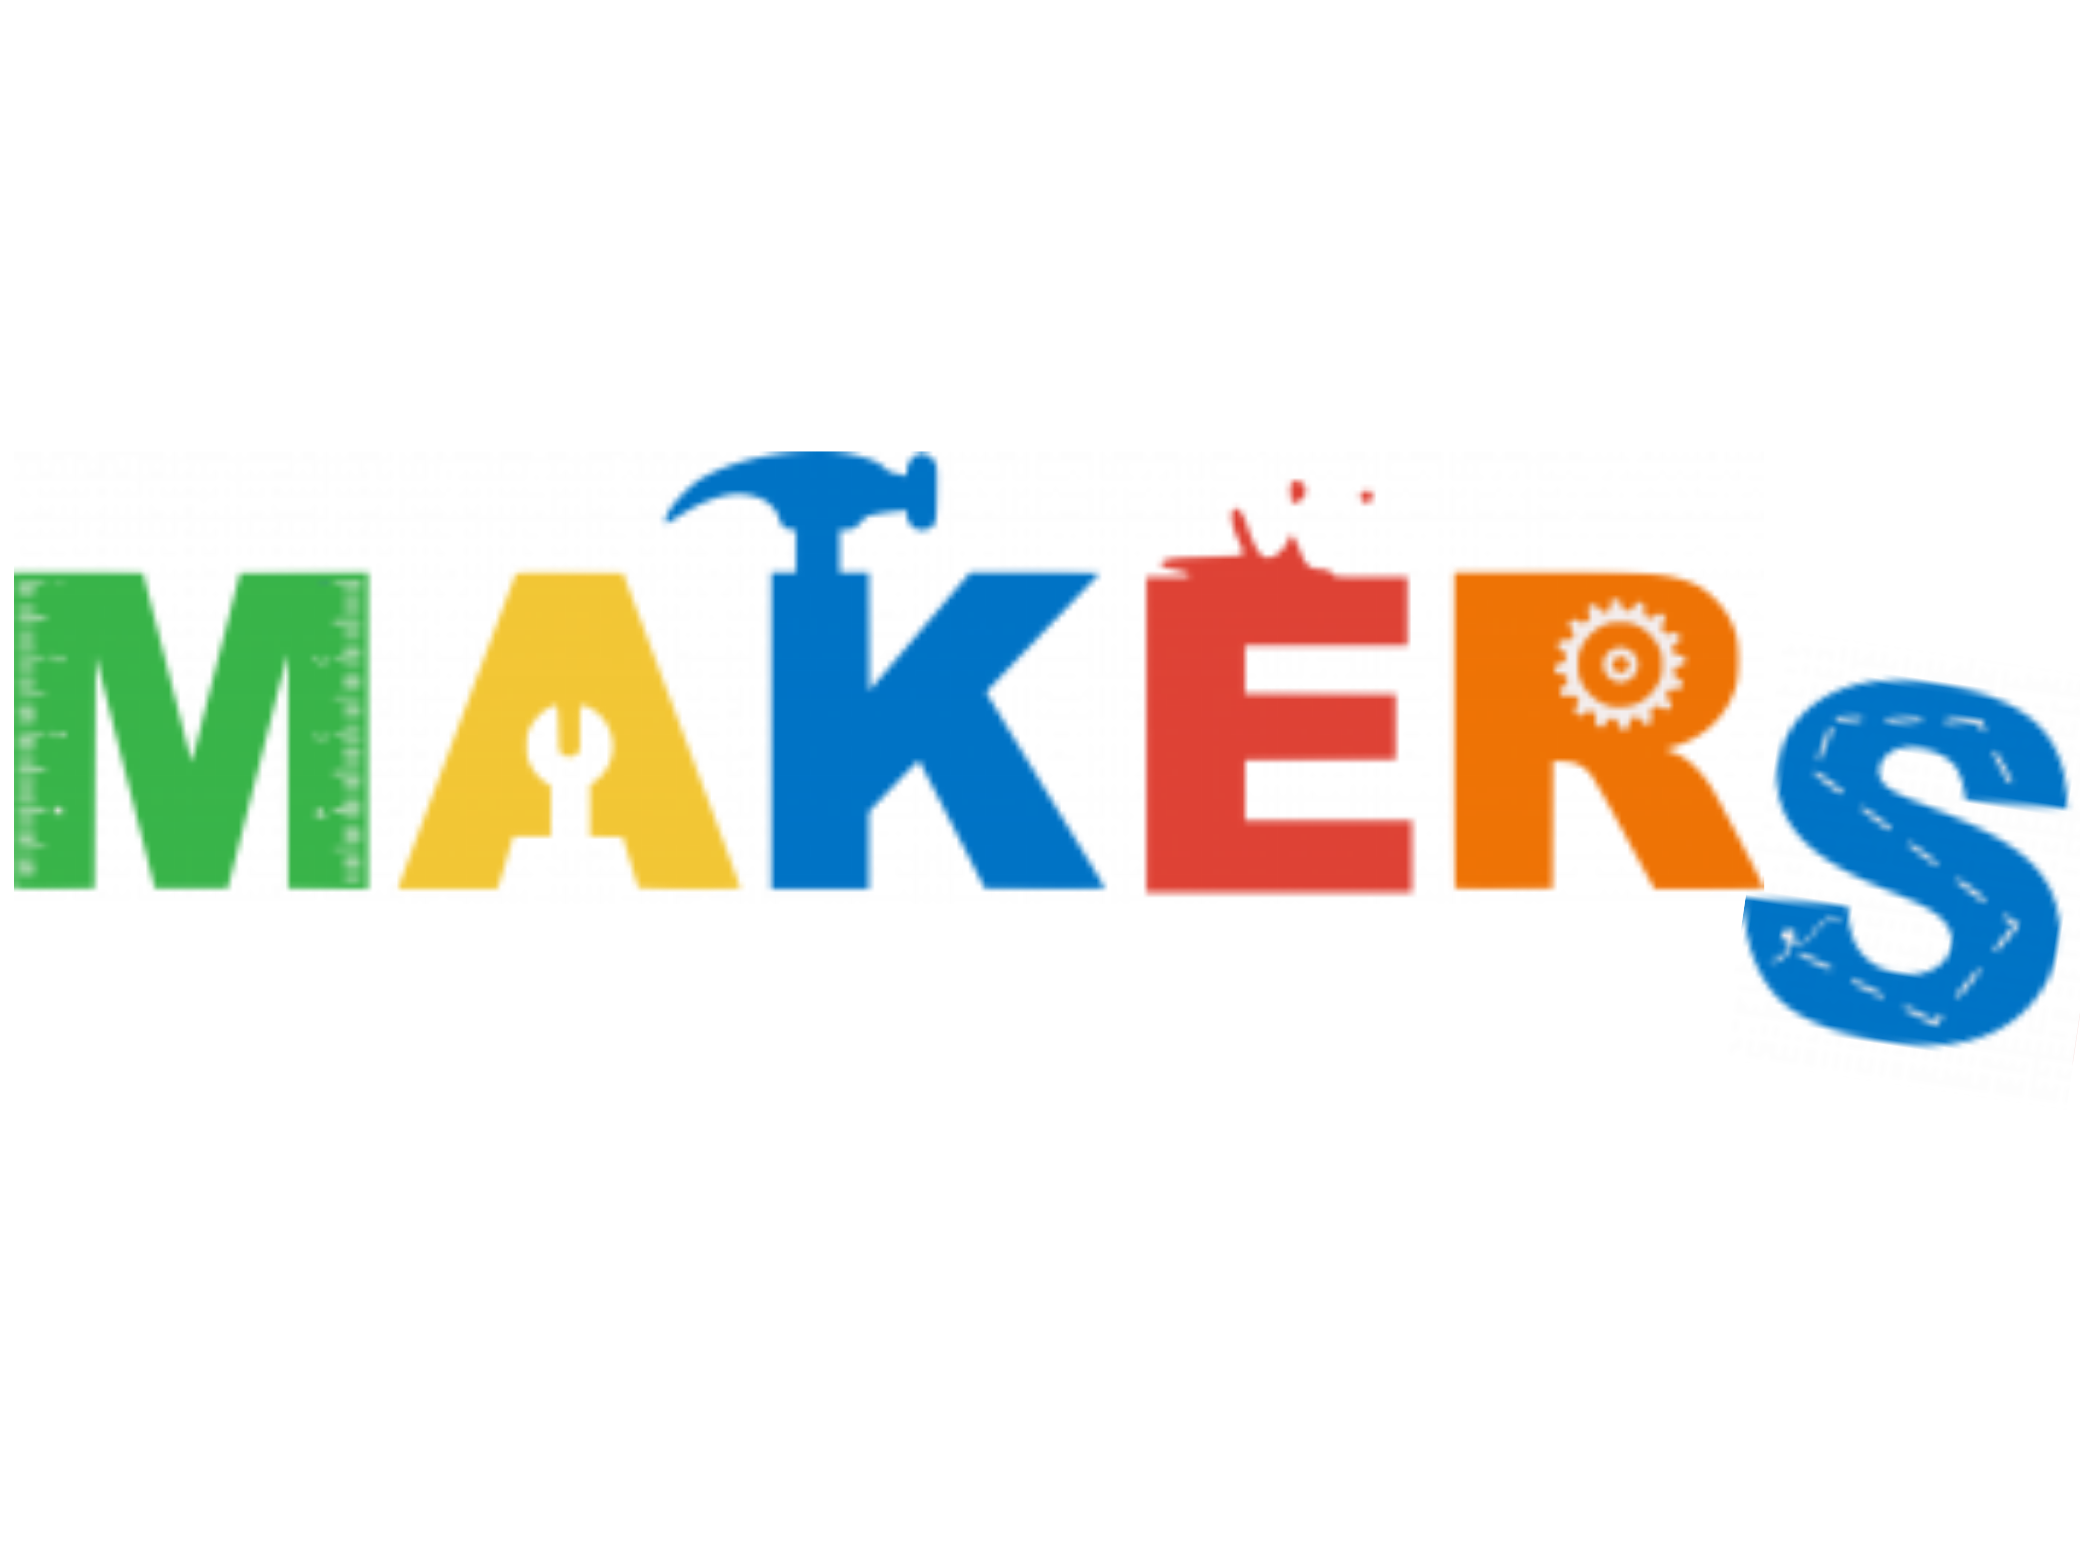 The letters "MAKERS" made to look like tools.